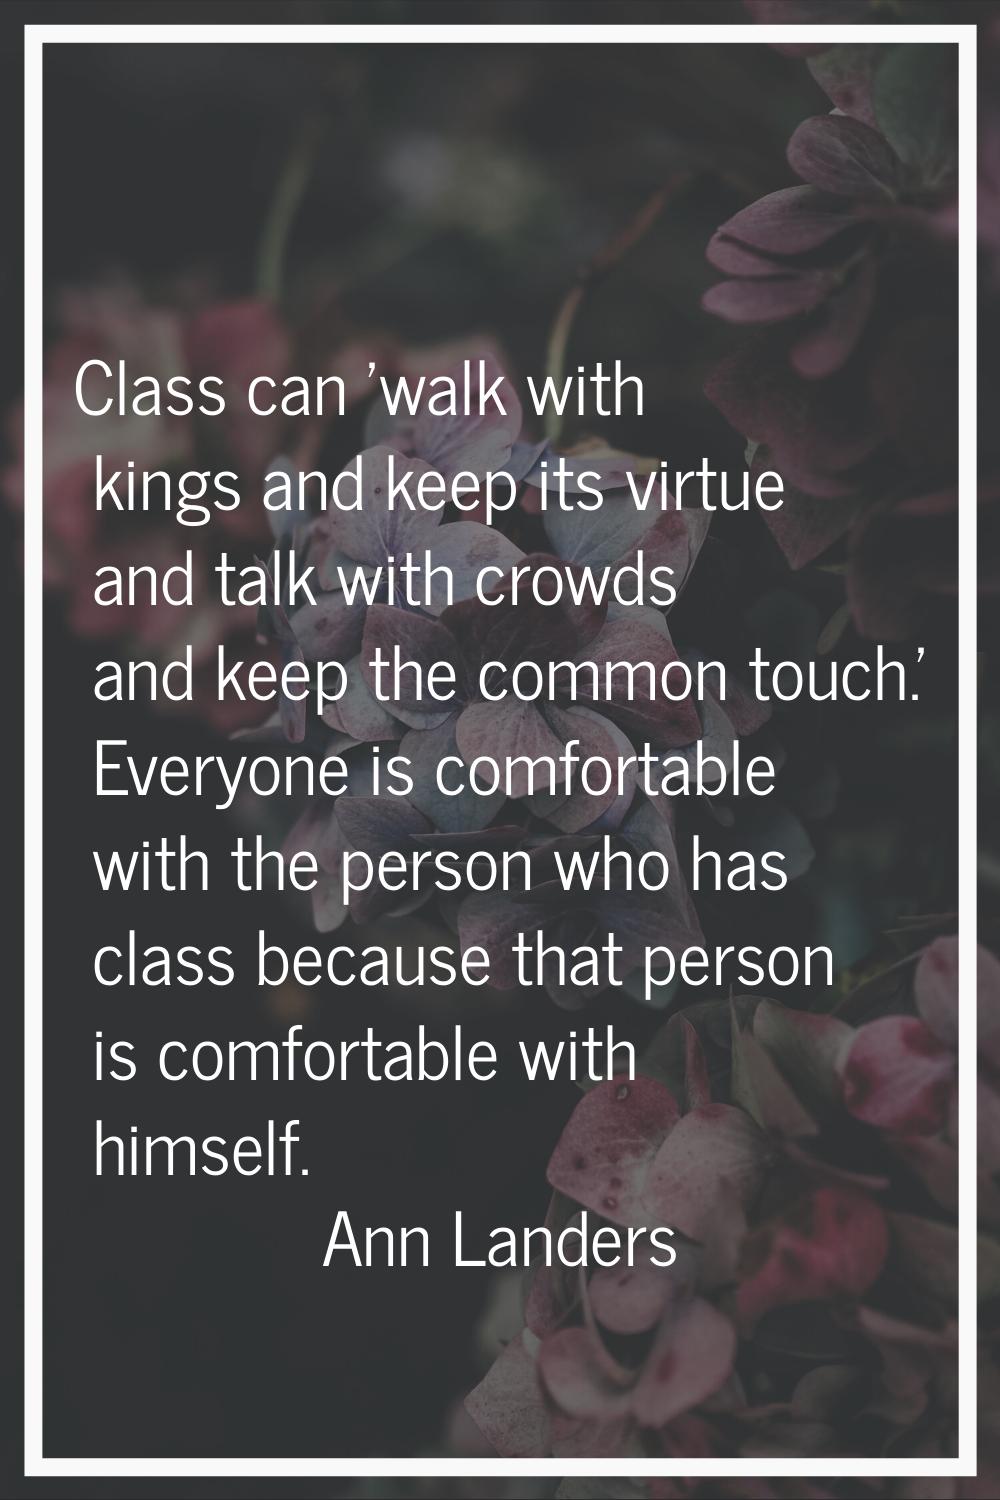 Class can 'walk with kings and keep its virtue and talk with crowds and keep the common touch.' Eve